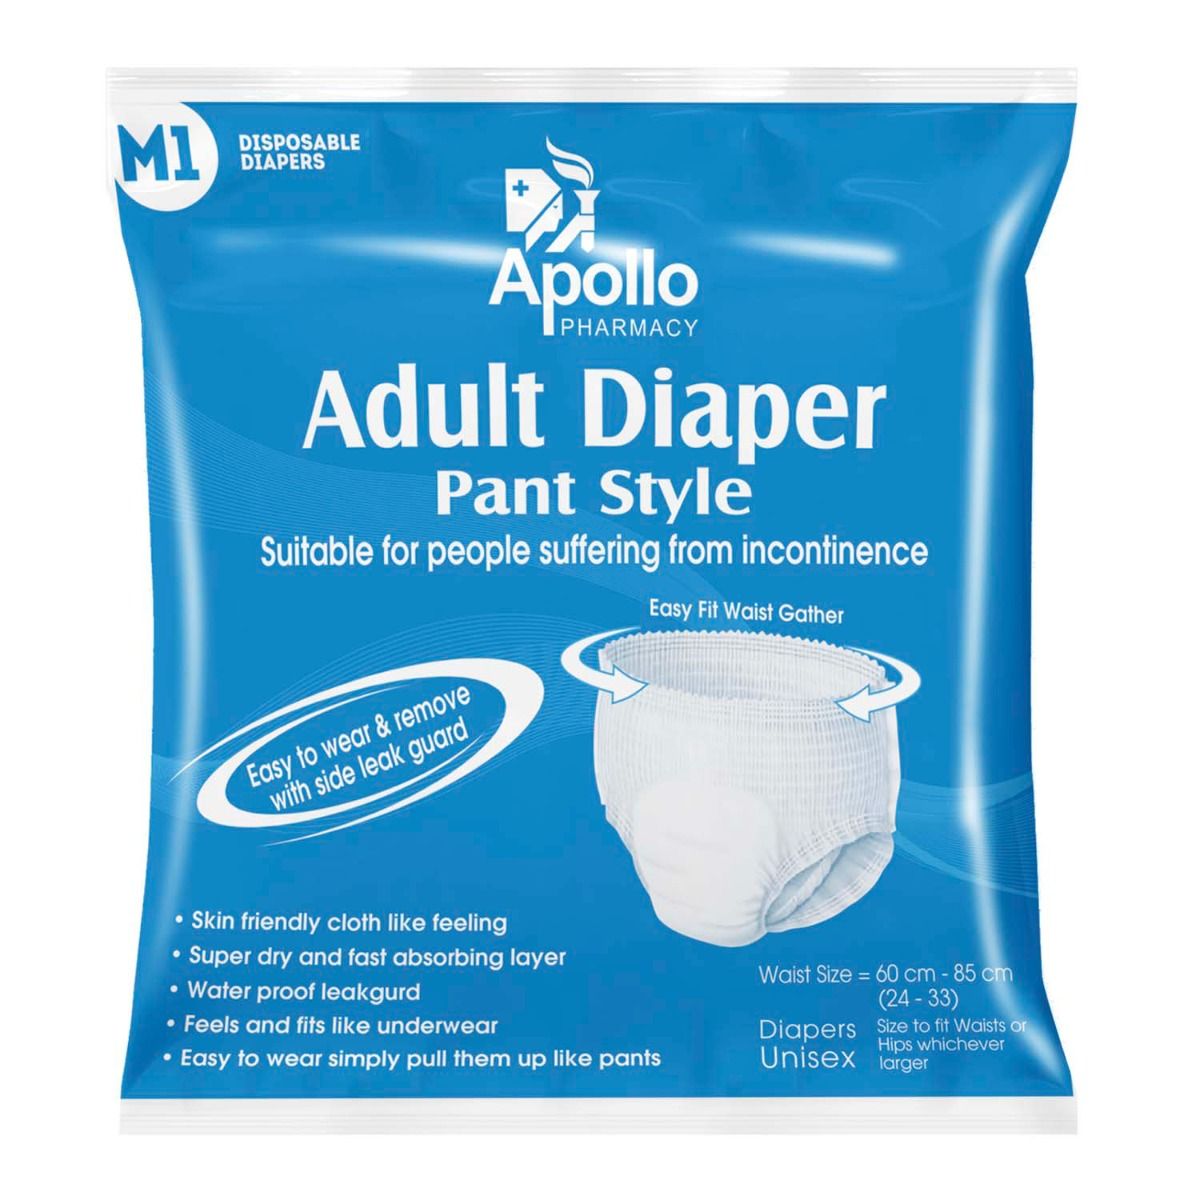 Apollo Pharmacy Adult Diaper Pants Medium, 10 Count Price, Uses, Side  Effects, Composition - Apollo Pharmacy